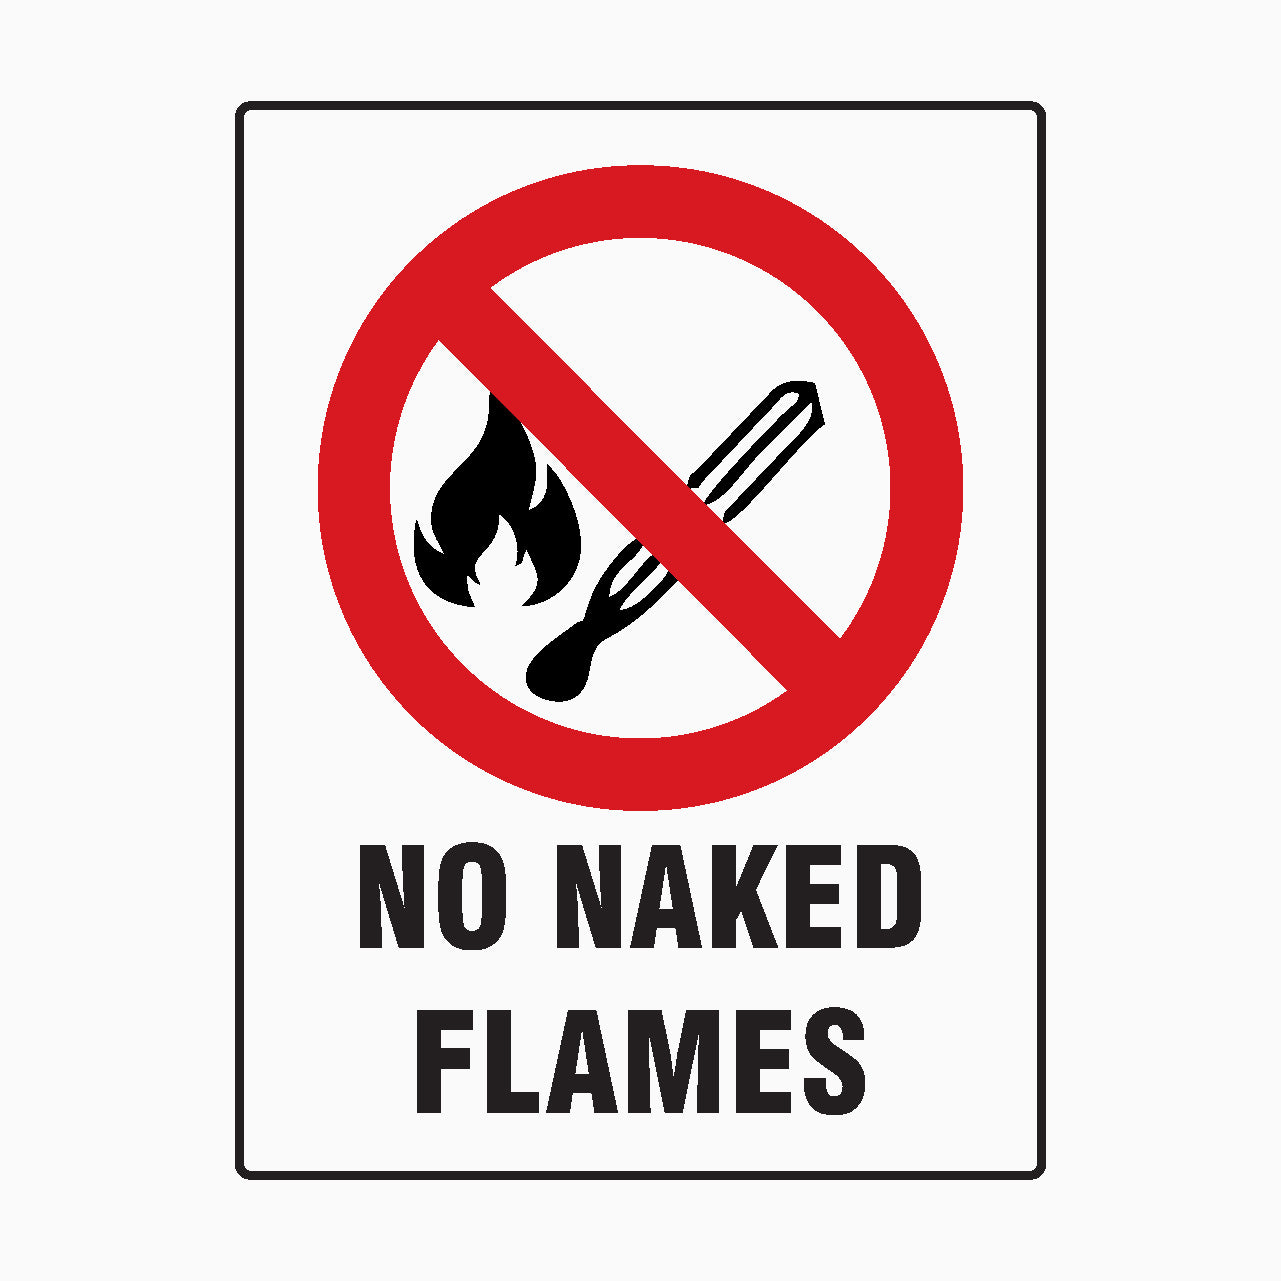 NO NAKED FLAMES SIGN - Prohibition Signs